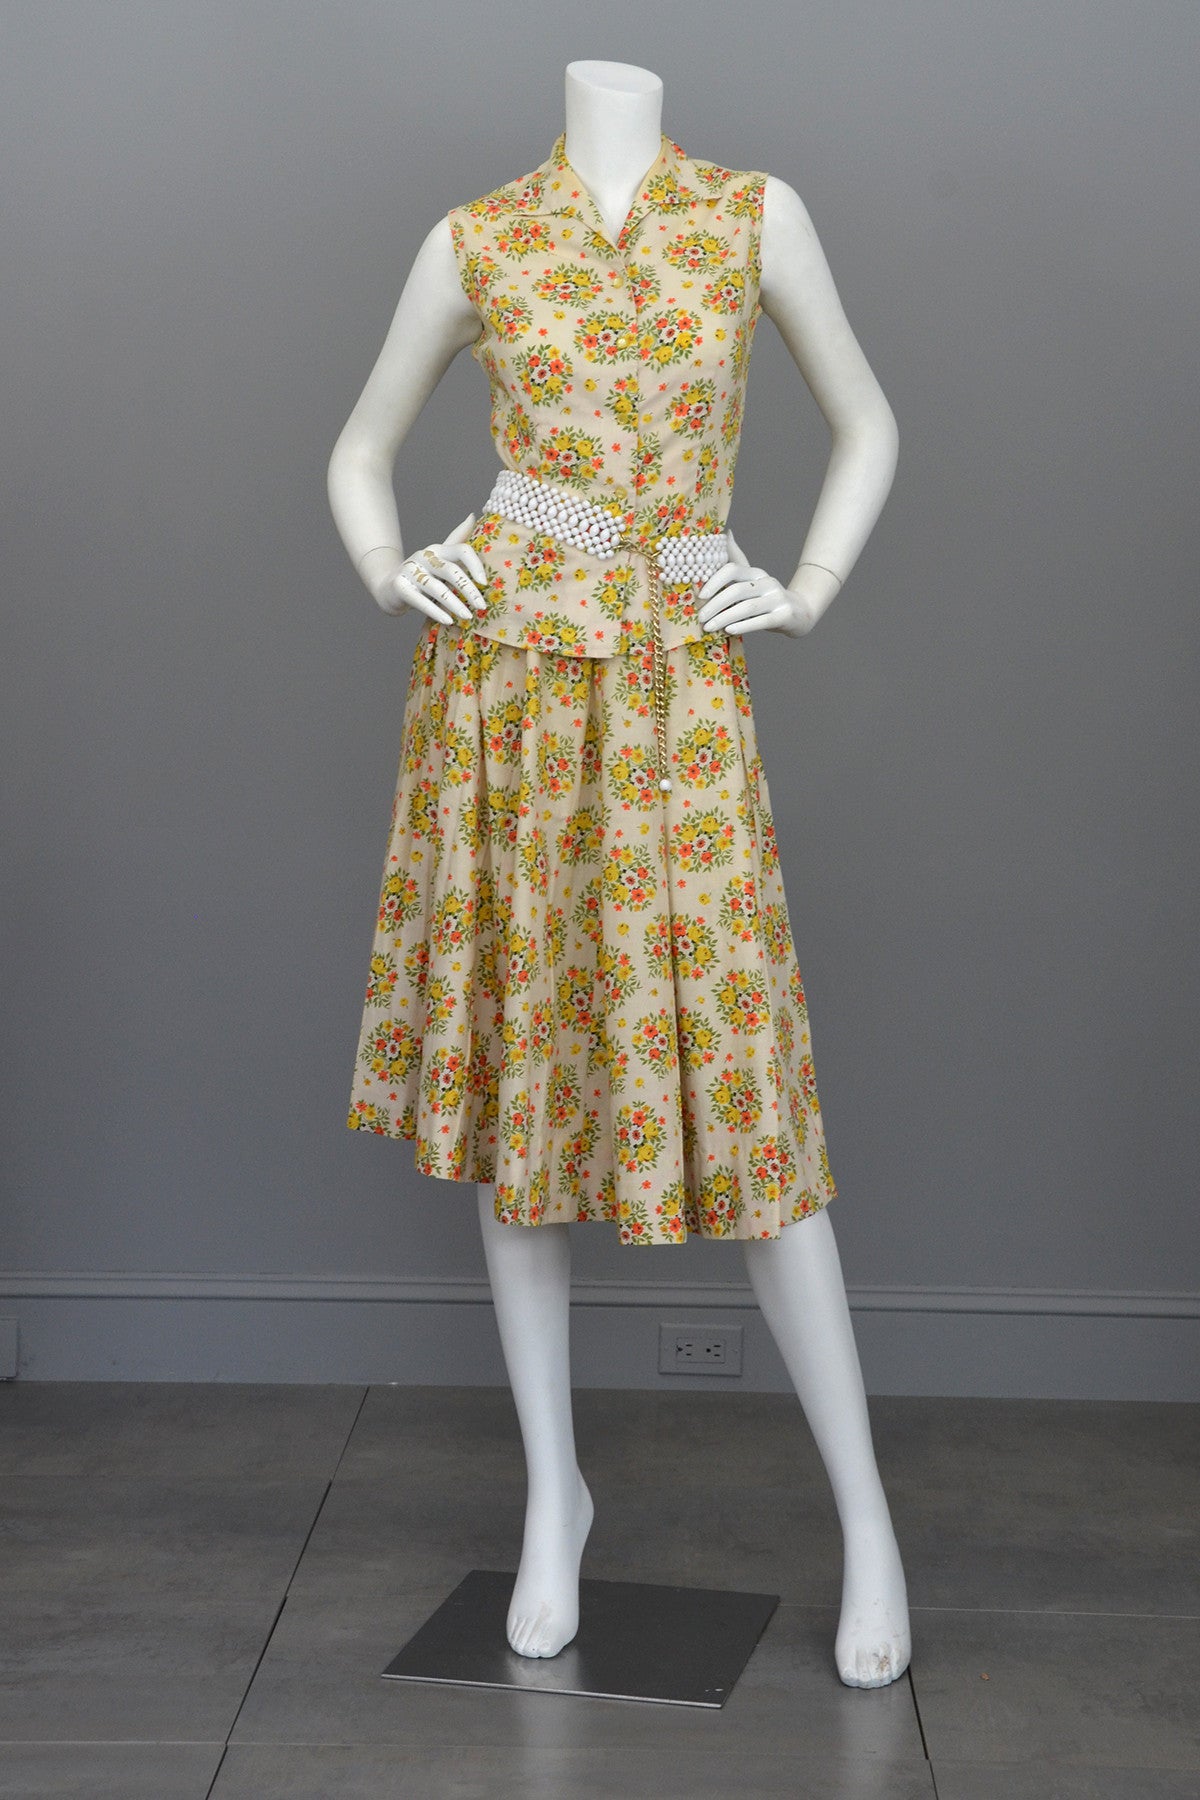 Vintage 1950's Cotton Yellow Rose Print Skirt and Top Dress